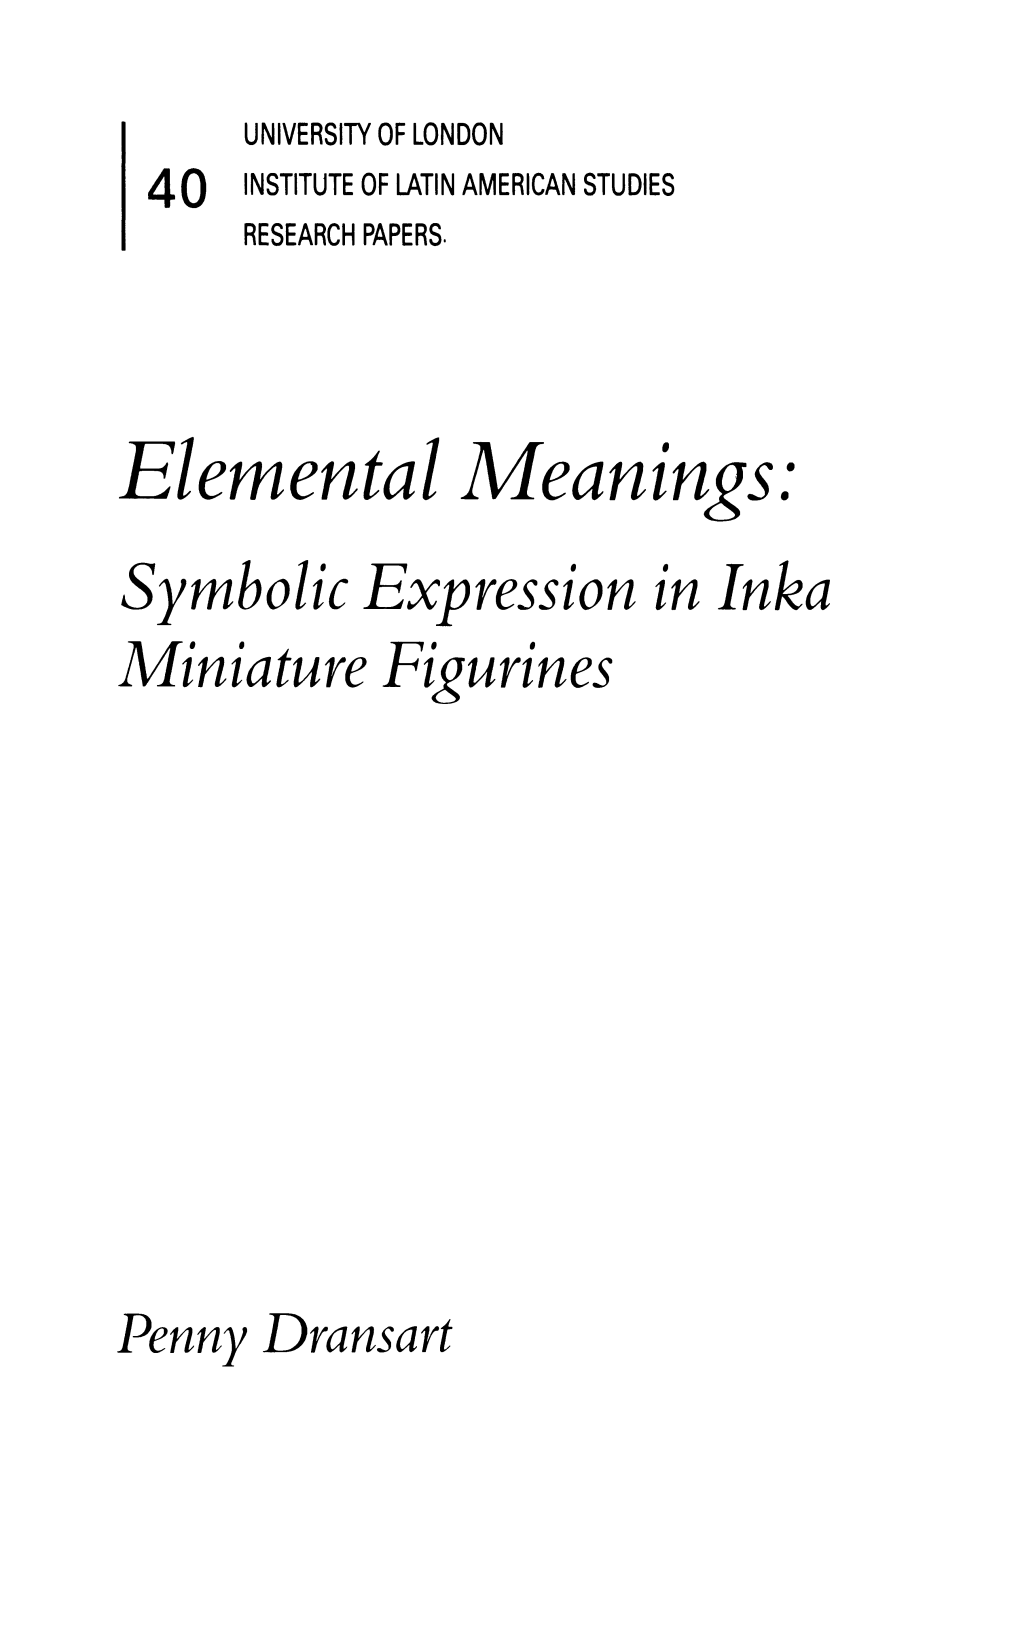 Elemental Meanings: Symbolic Expression in Inka Miniature Figurines